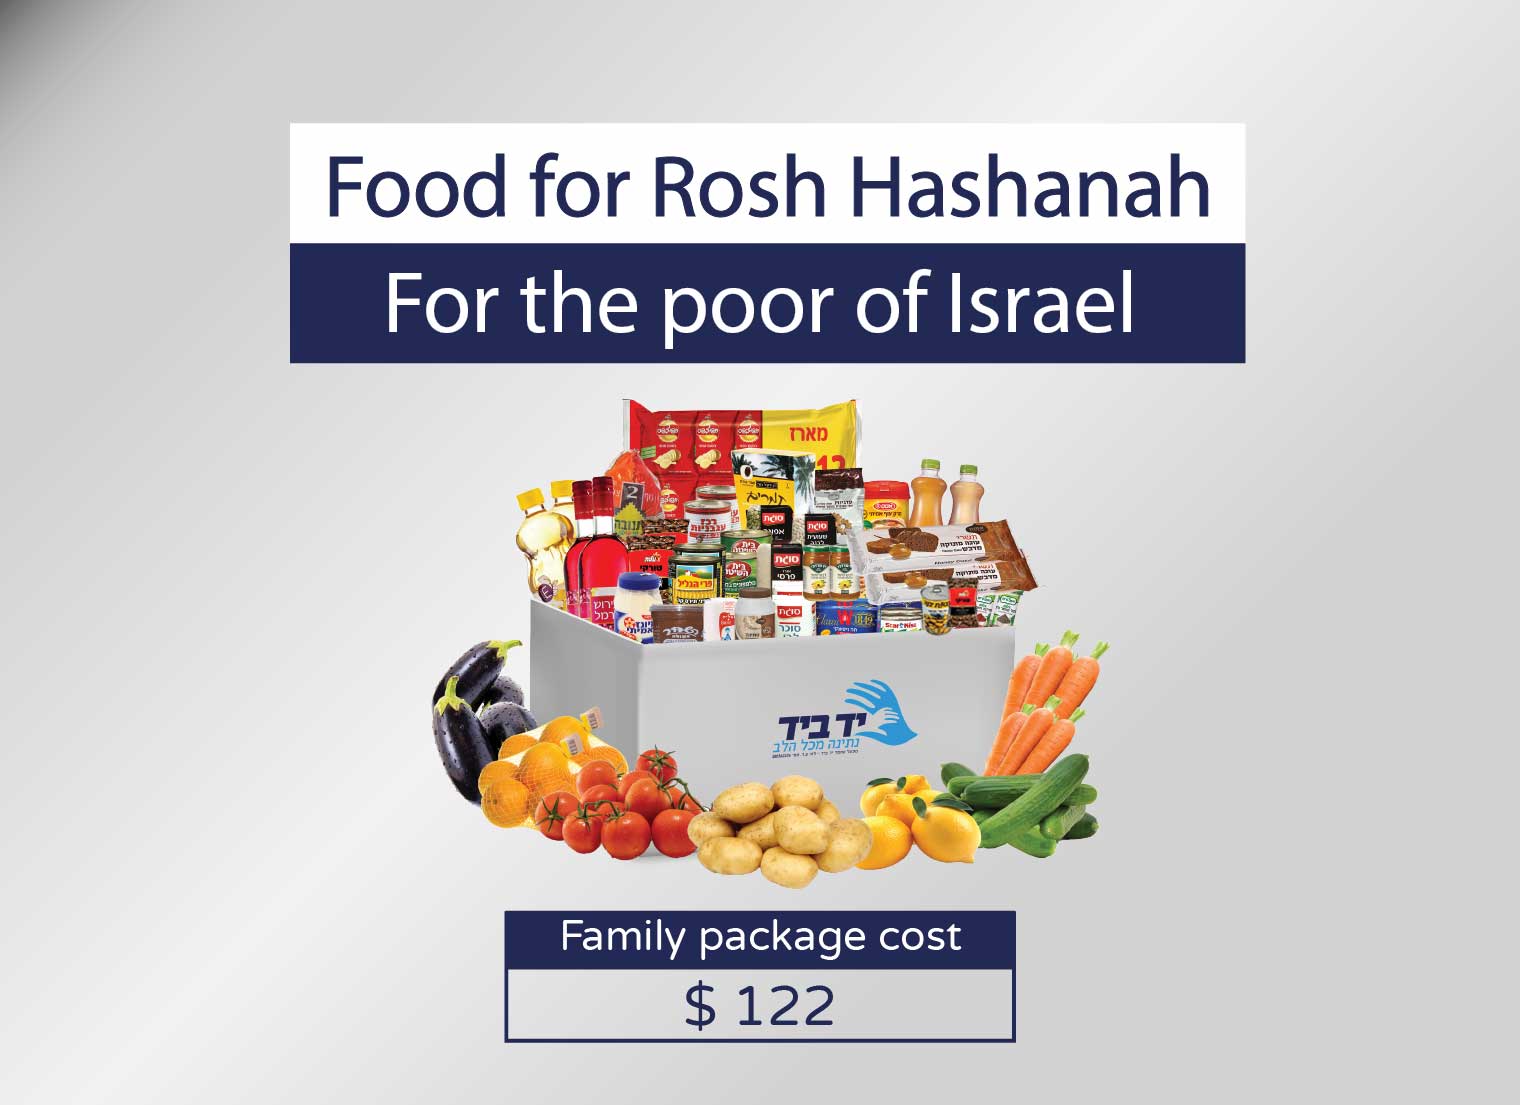 Food for the poor of Israel